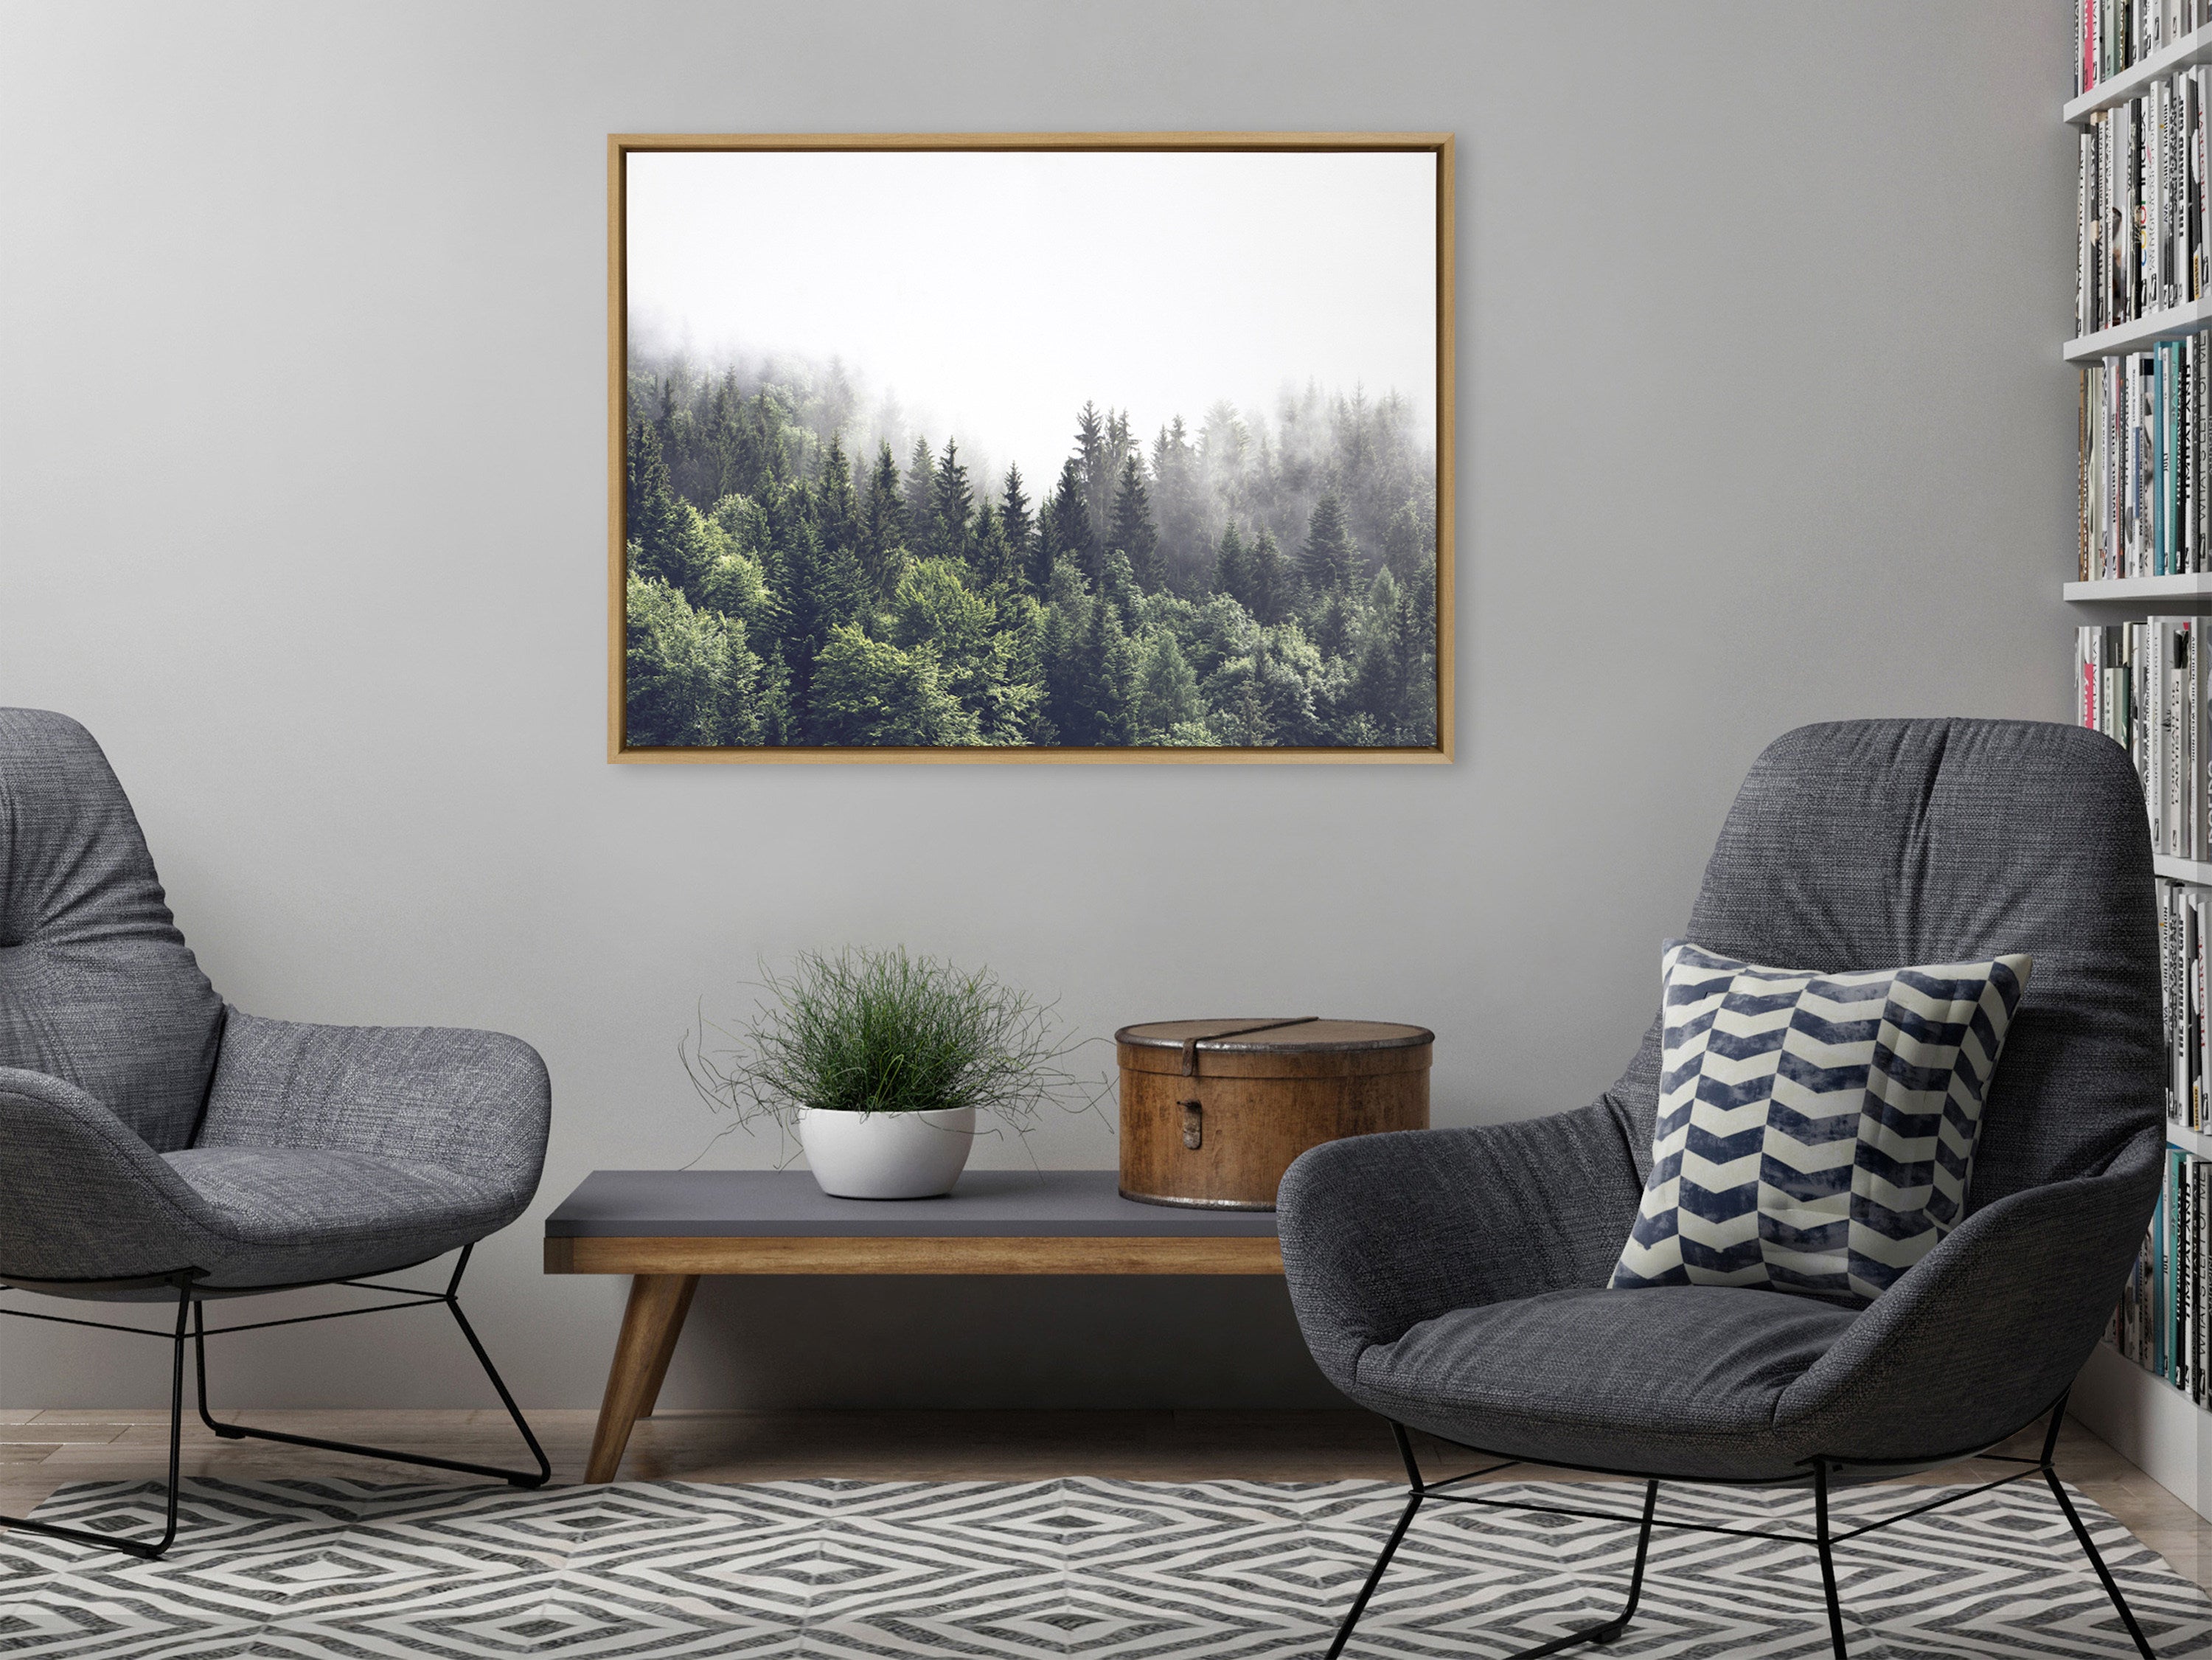 Sylvie Lush Green Forest On A Foggy Day Framed Canvas by The Creative Bunch Studio